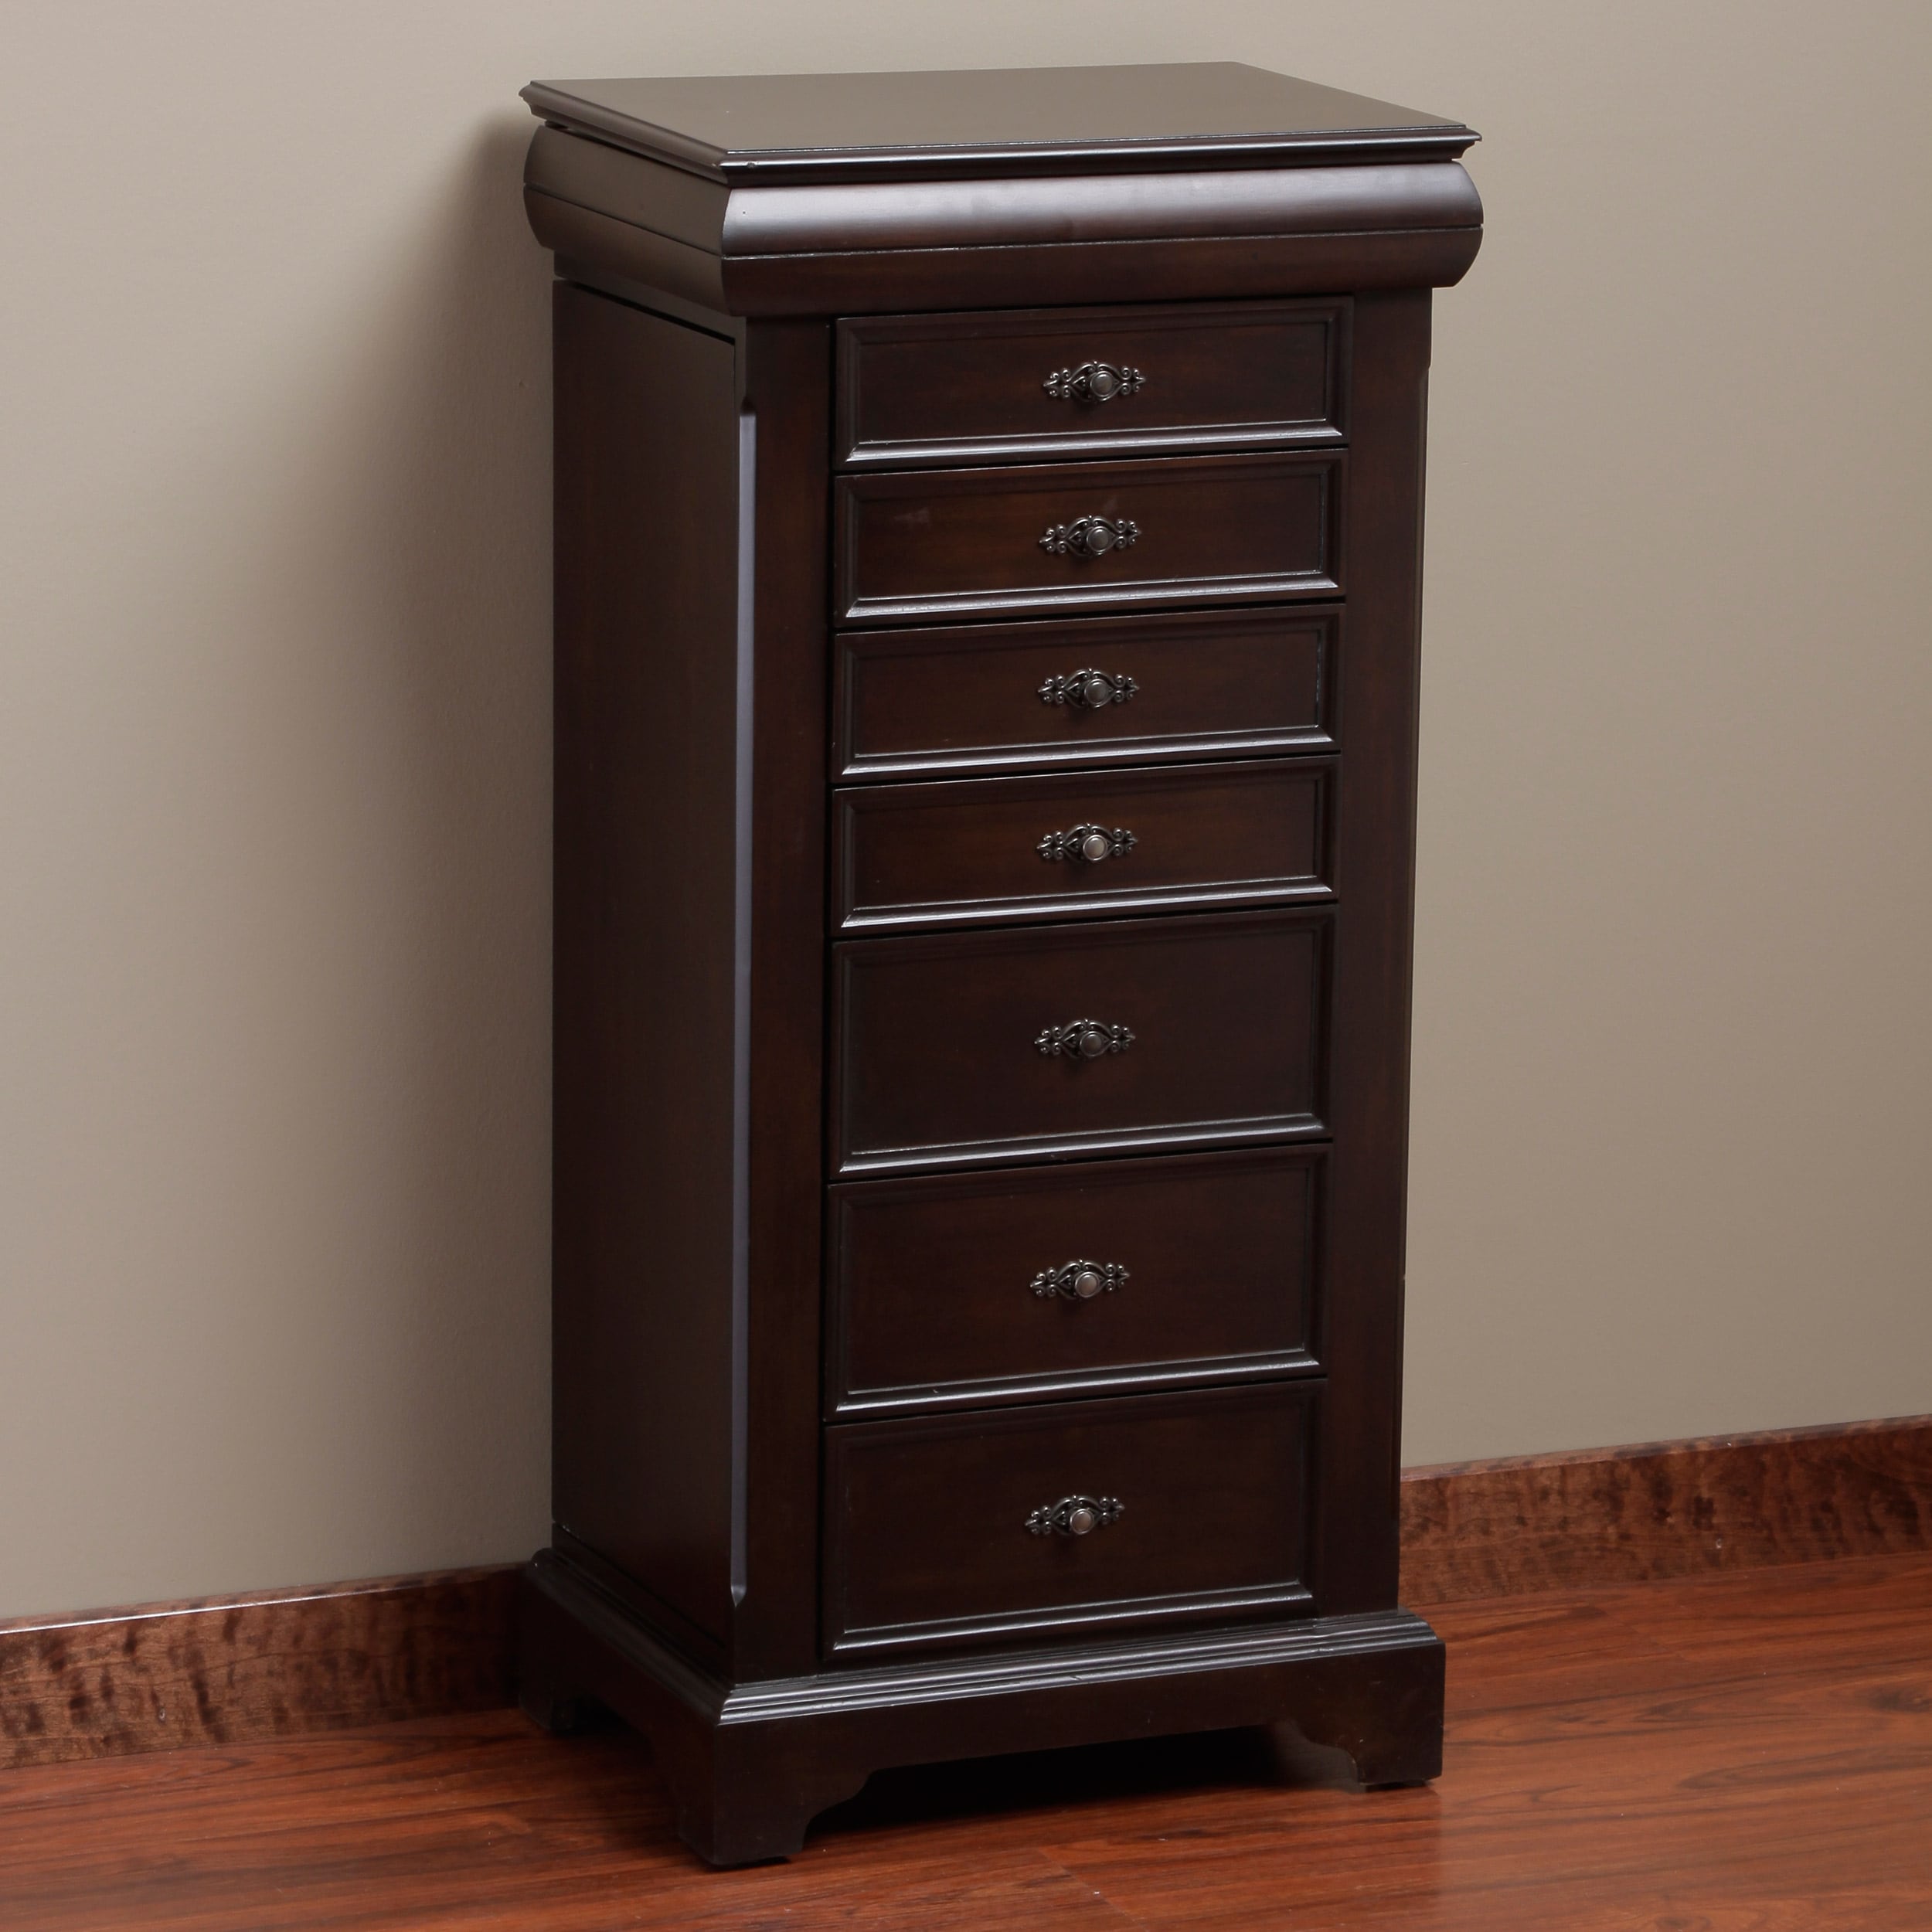 Shop Louis 7 Drawer Locking Jewelry Armoire Overstock 6541323